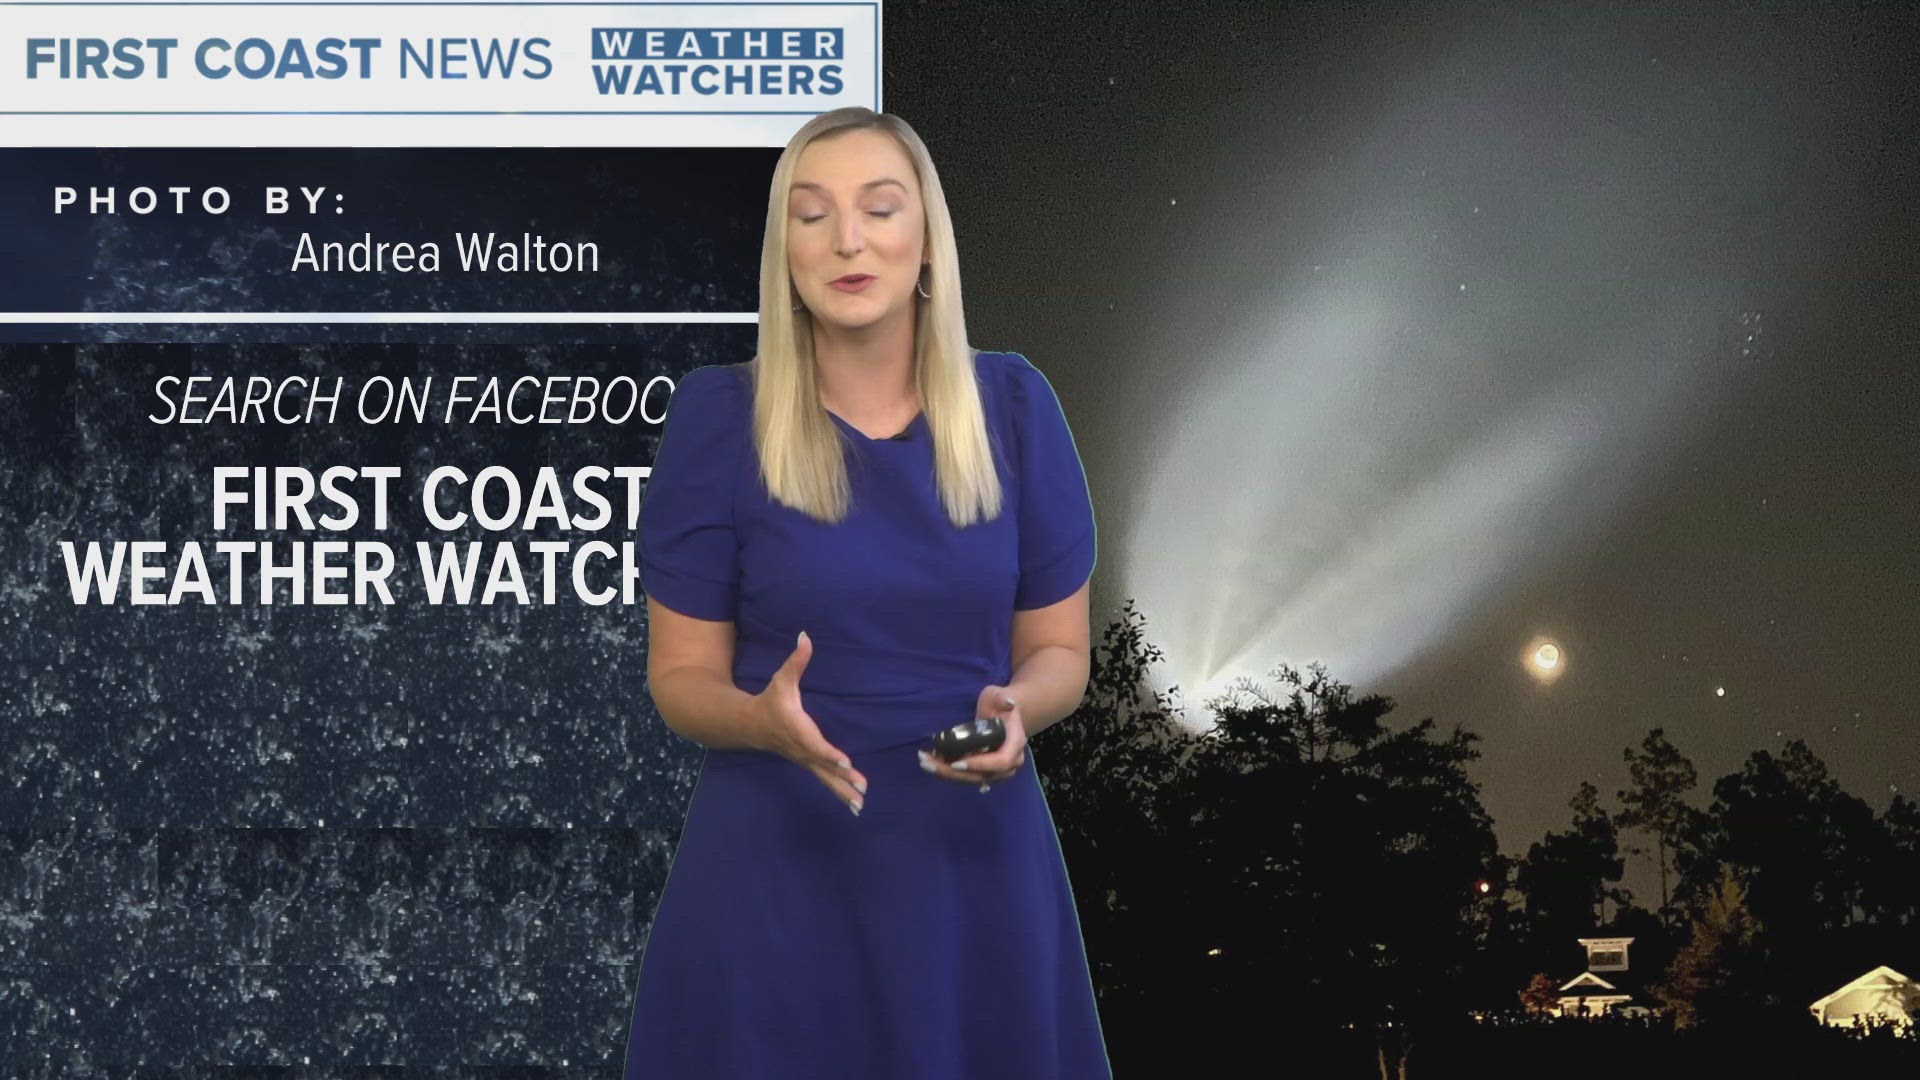 One First Coast News 'weather watcher' even heard a "small sonic boom" along with seeing the captivating trail of light.